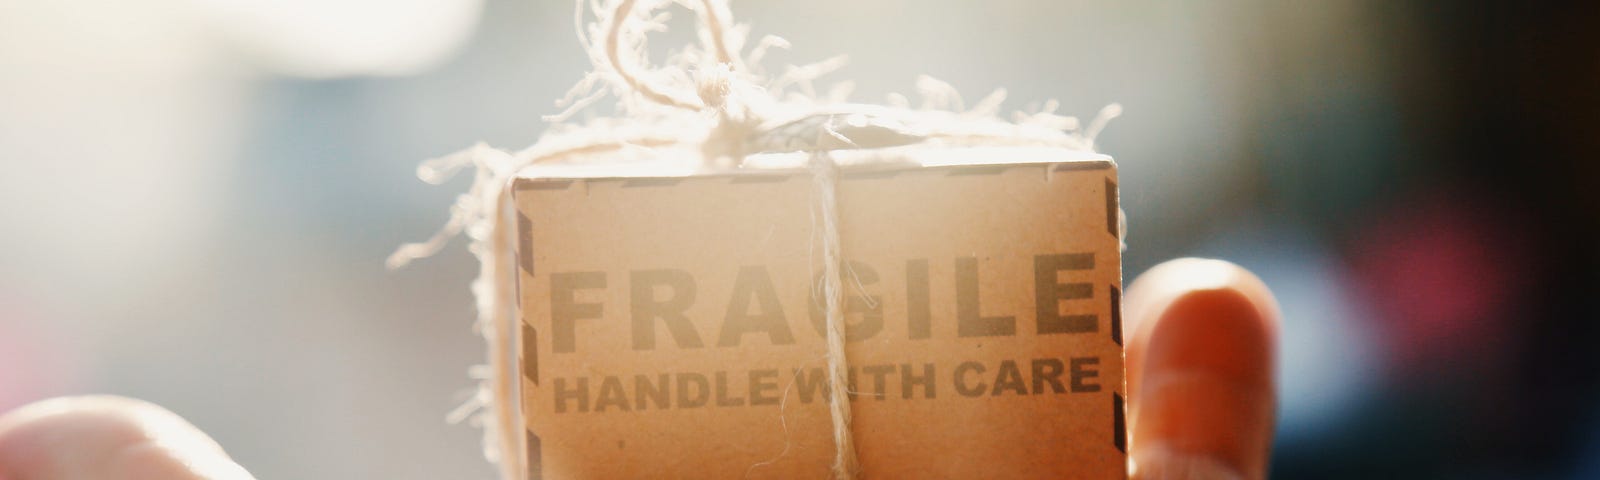 A small box which says “FRAGILE: handle with care” is wrapped in string and sits in the palm of a hand.